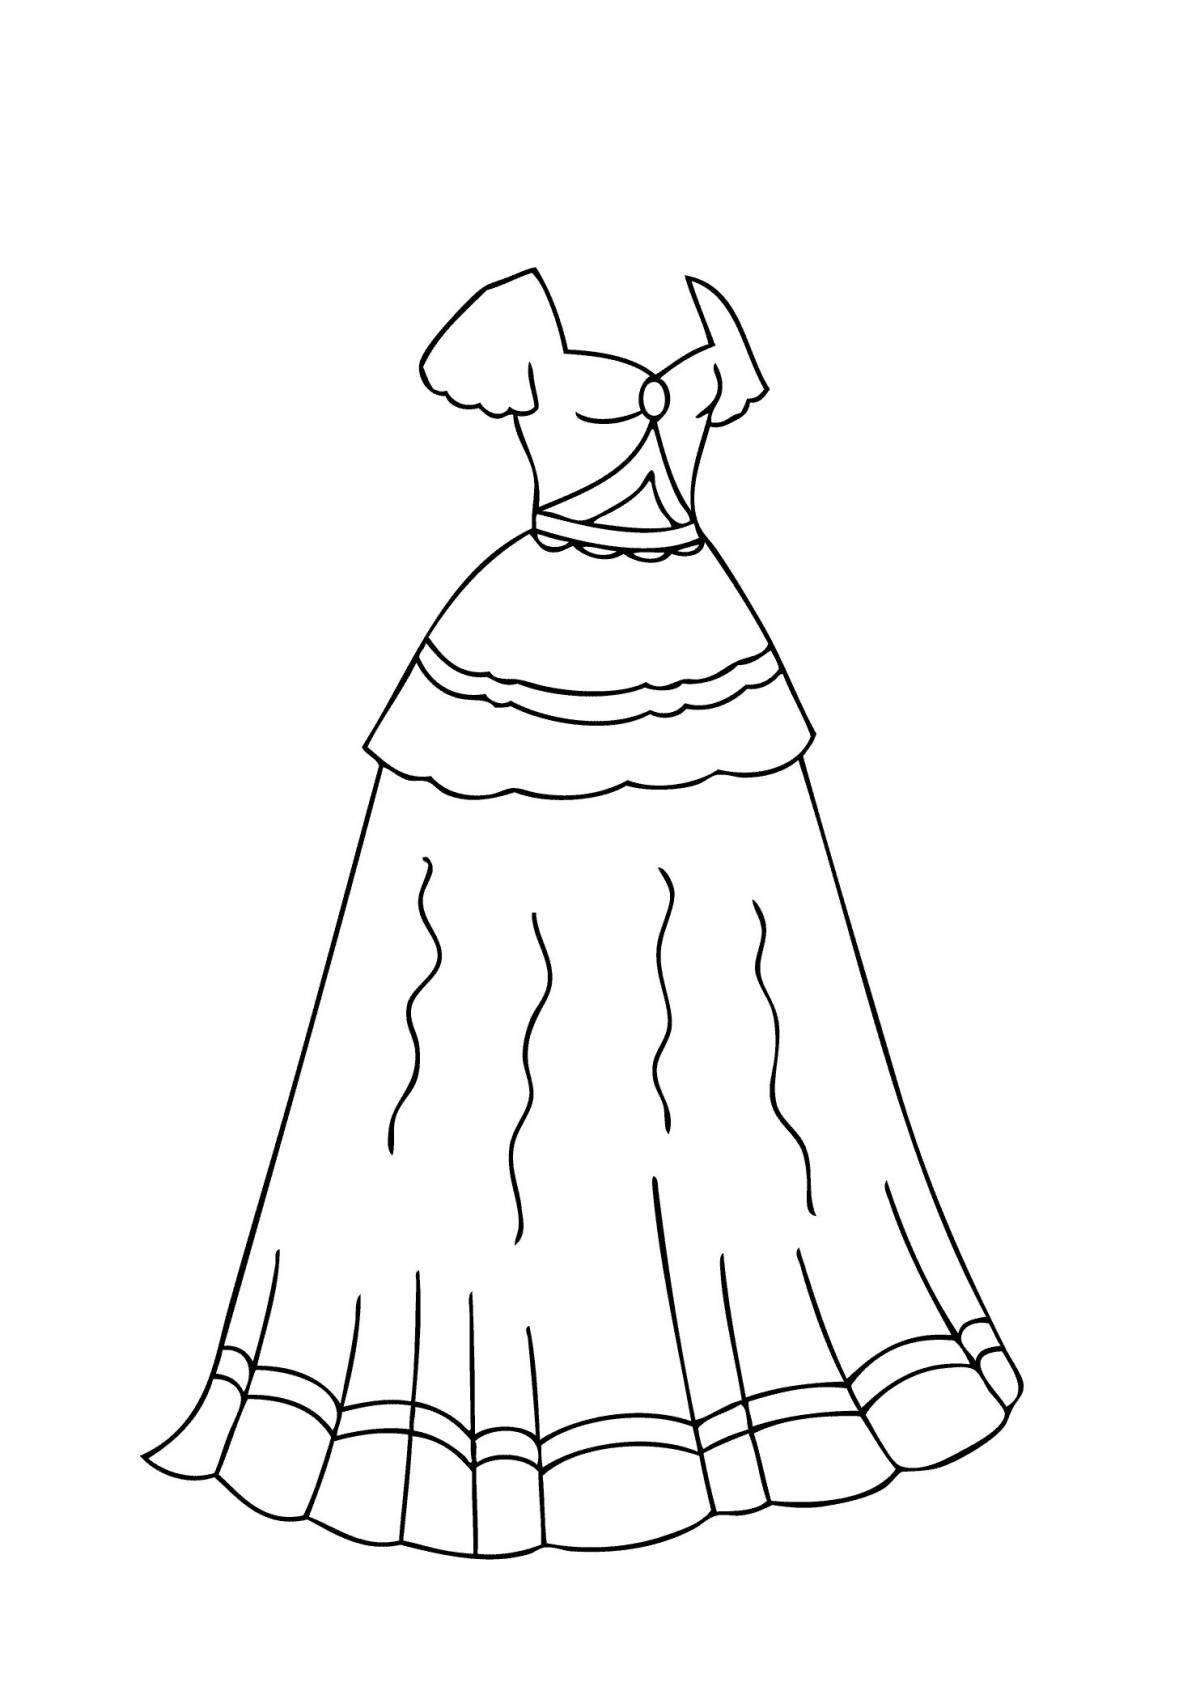 Coloring book funny children's sundresses